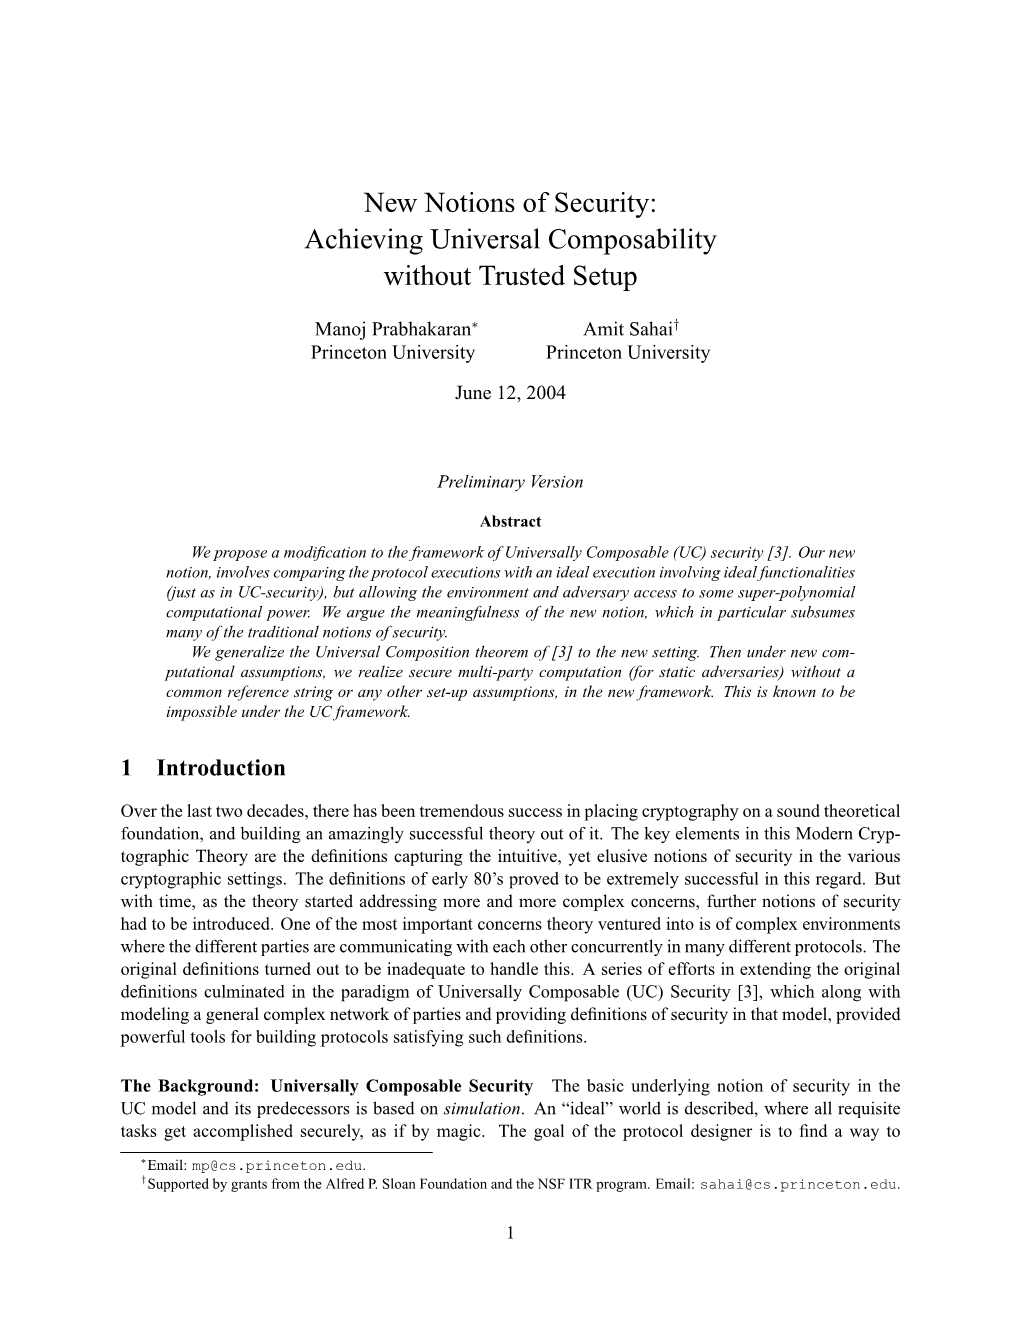 New Notions of Security: Achieving Universal Composability Without Trusted Setup